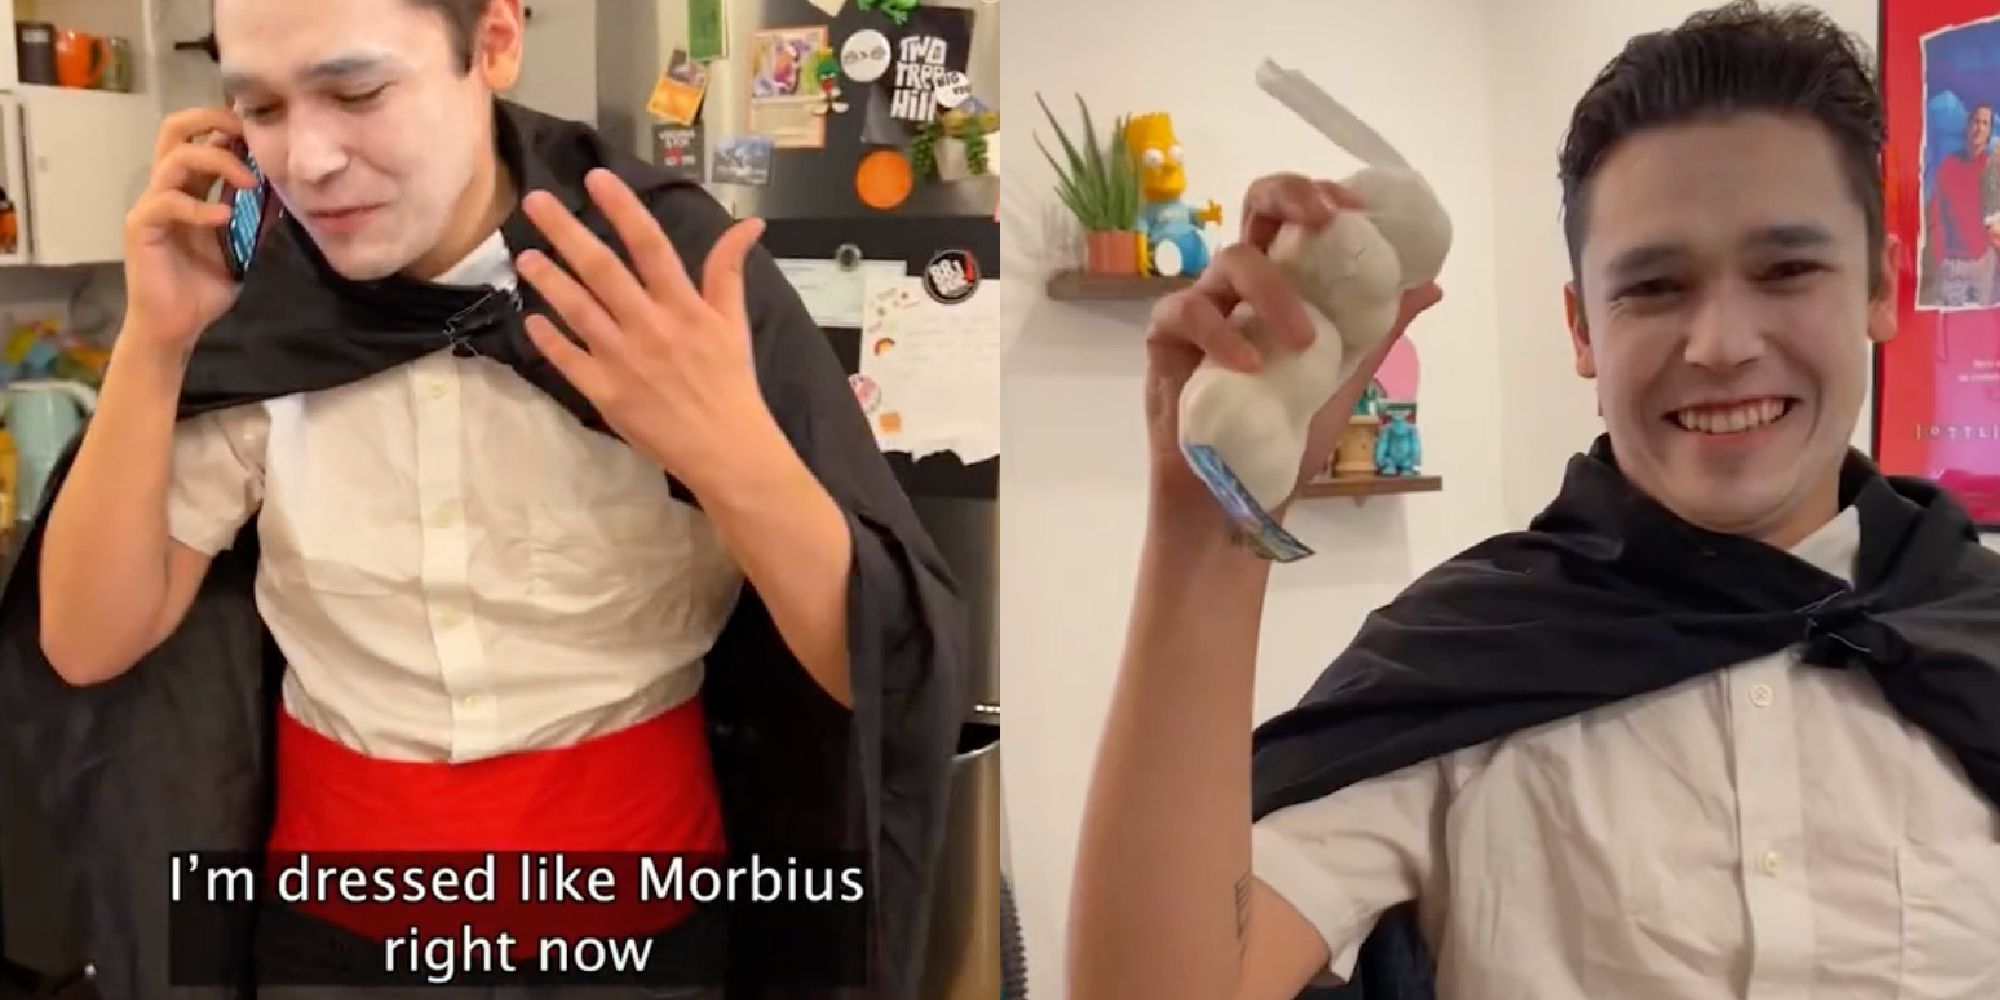 A TikToker dressed as Dracula to see Morbius in a skit